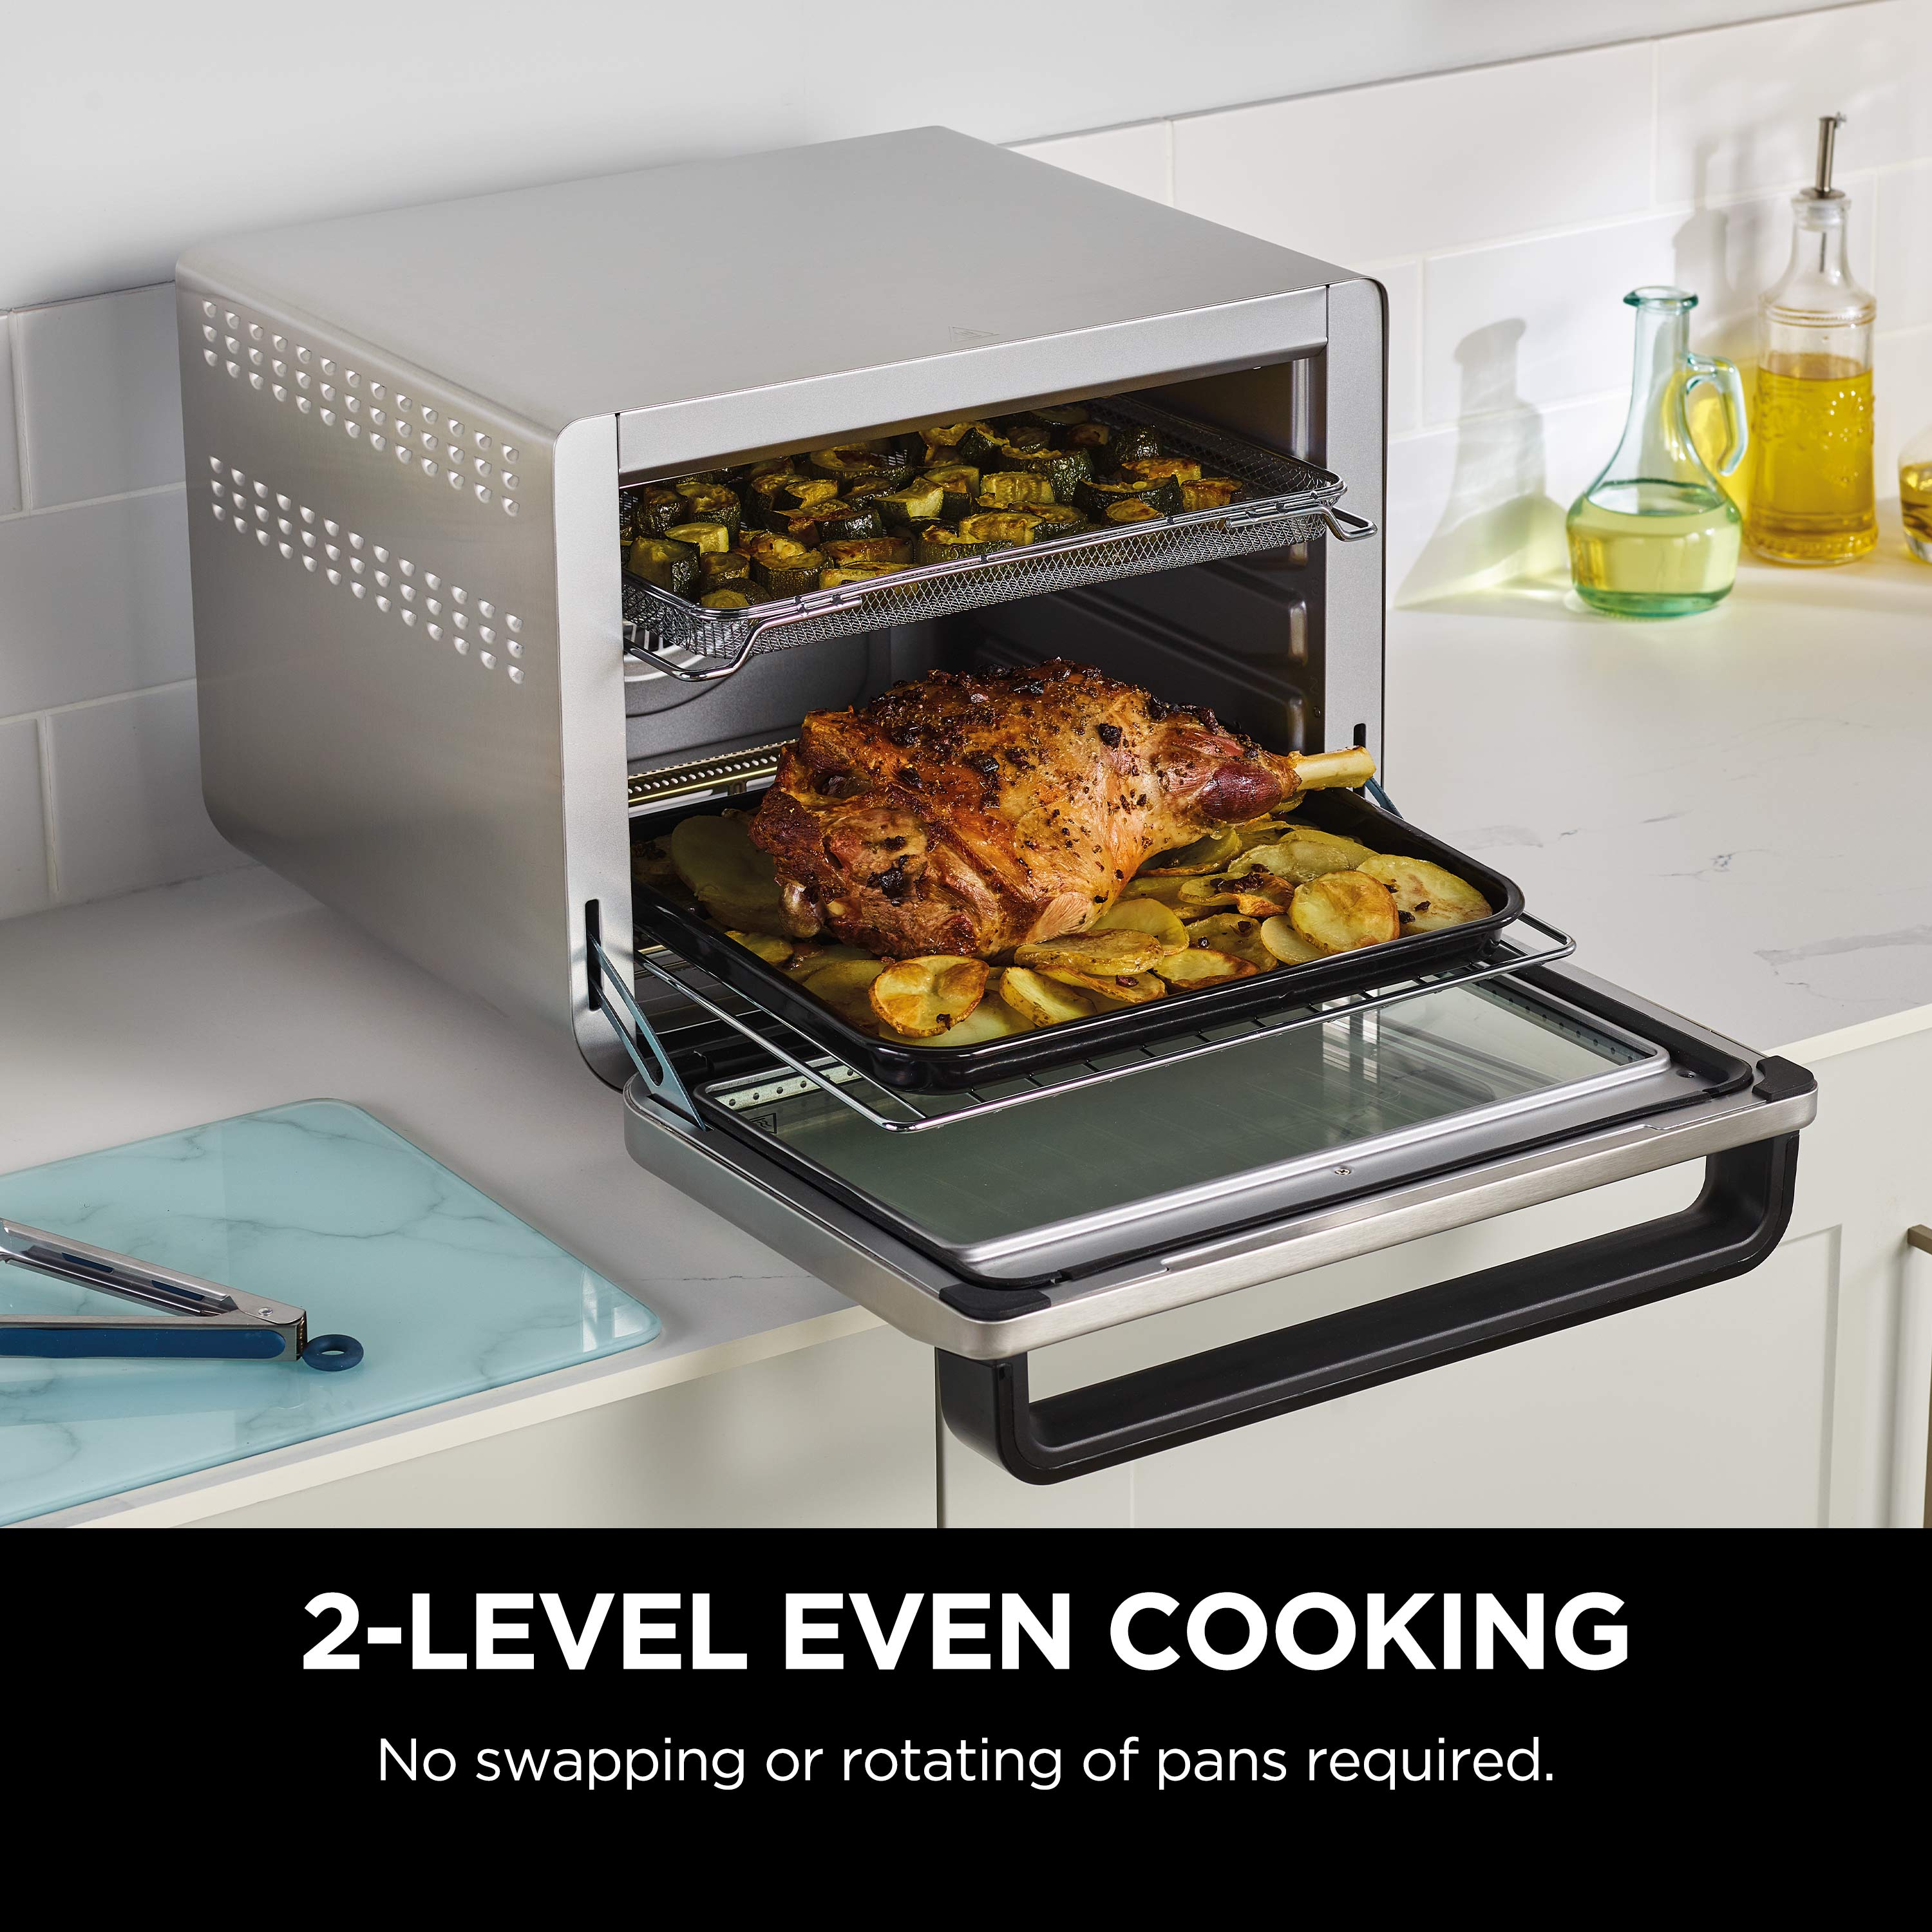 Ninja Foodi 8-in-1 XL Pro Air Fry Oven, Large Countertop Convection Oven, DT200 - image 2 of 12